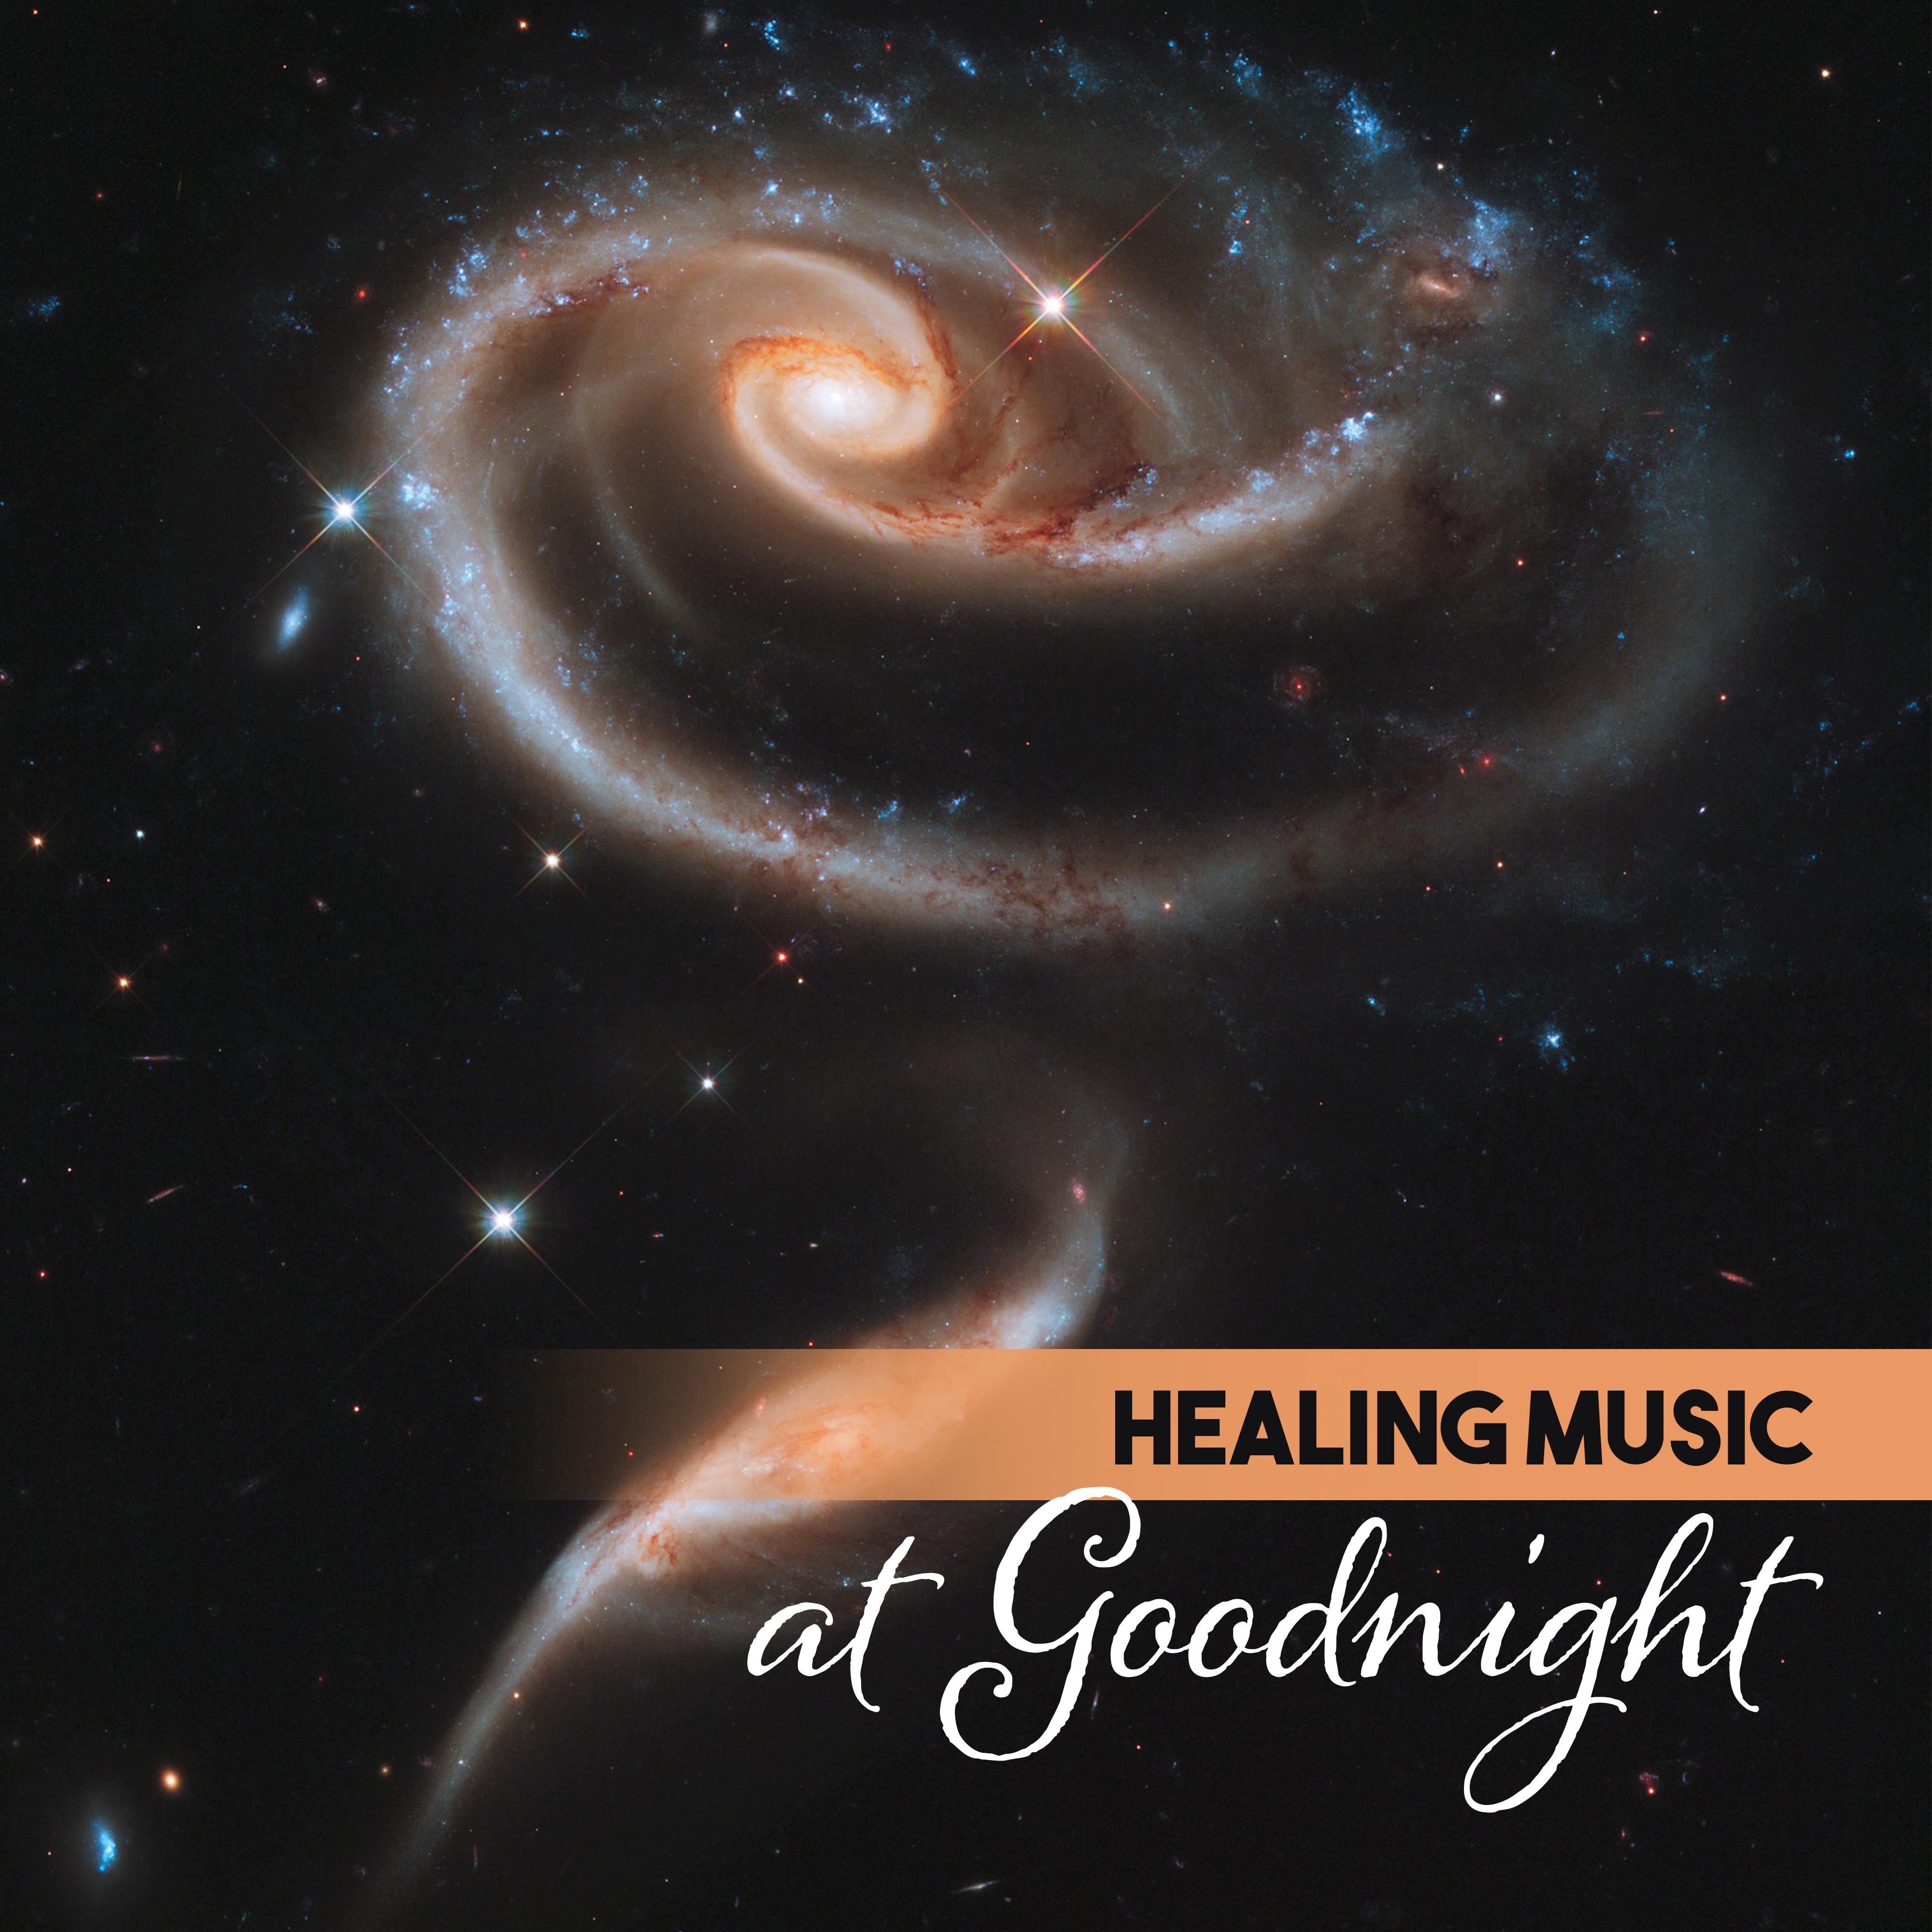 Healing Music at Goodnight – Relaxing Lullabies for Sleep, Relief, Calm Dream, Music to Pillow, Bedtime, Peaceful Mind